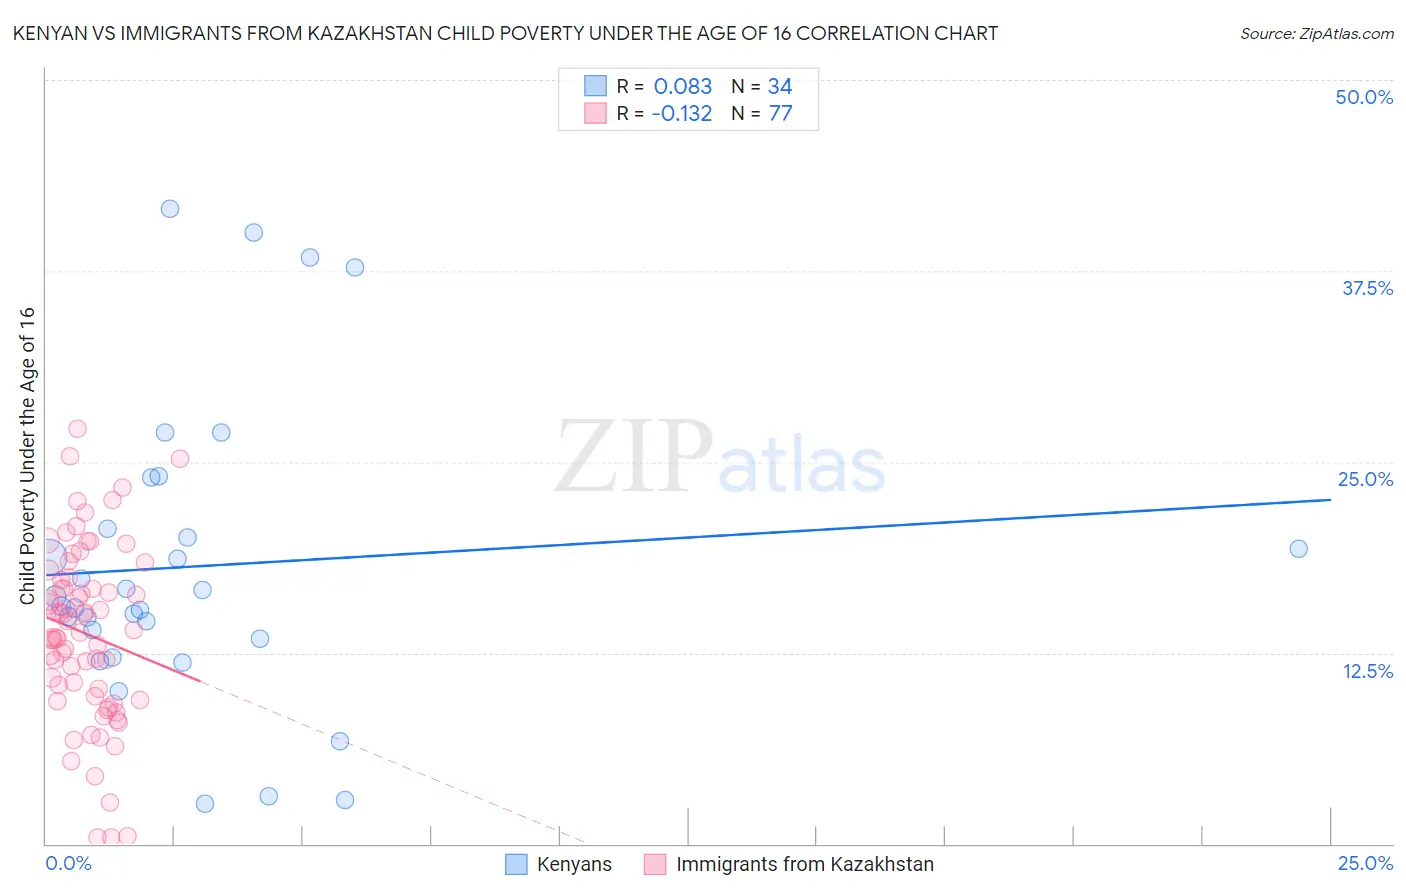 Kenyan vs Immigrants from Kazakhstan Child Poverty Under the Age of 16